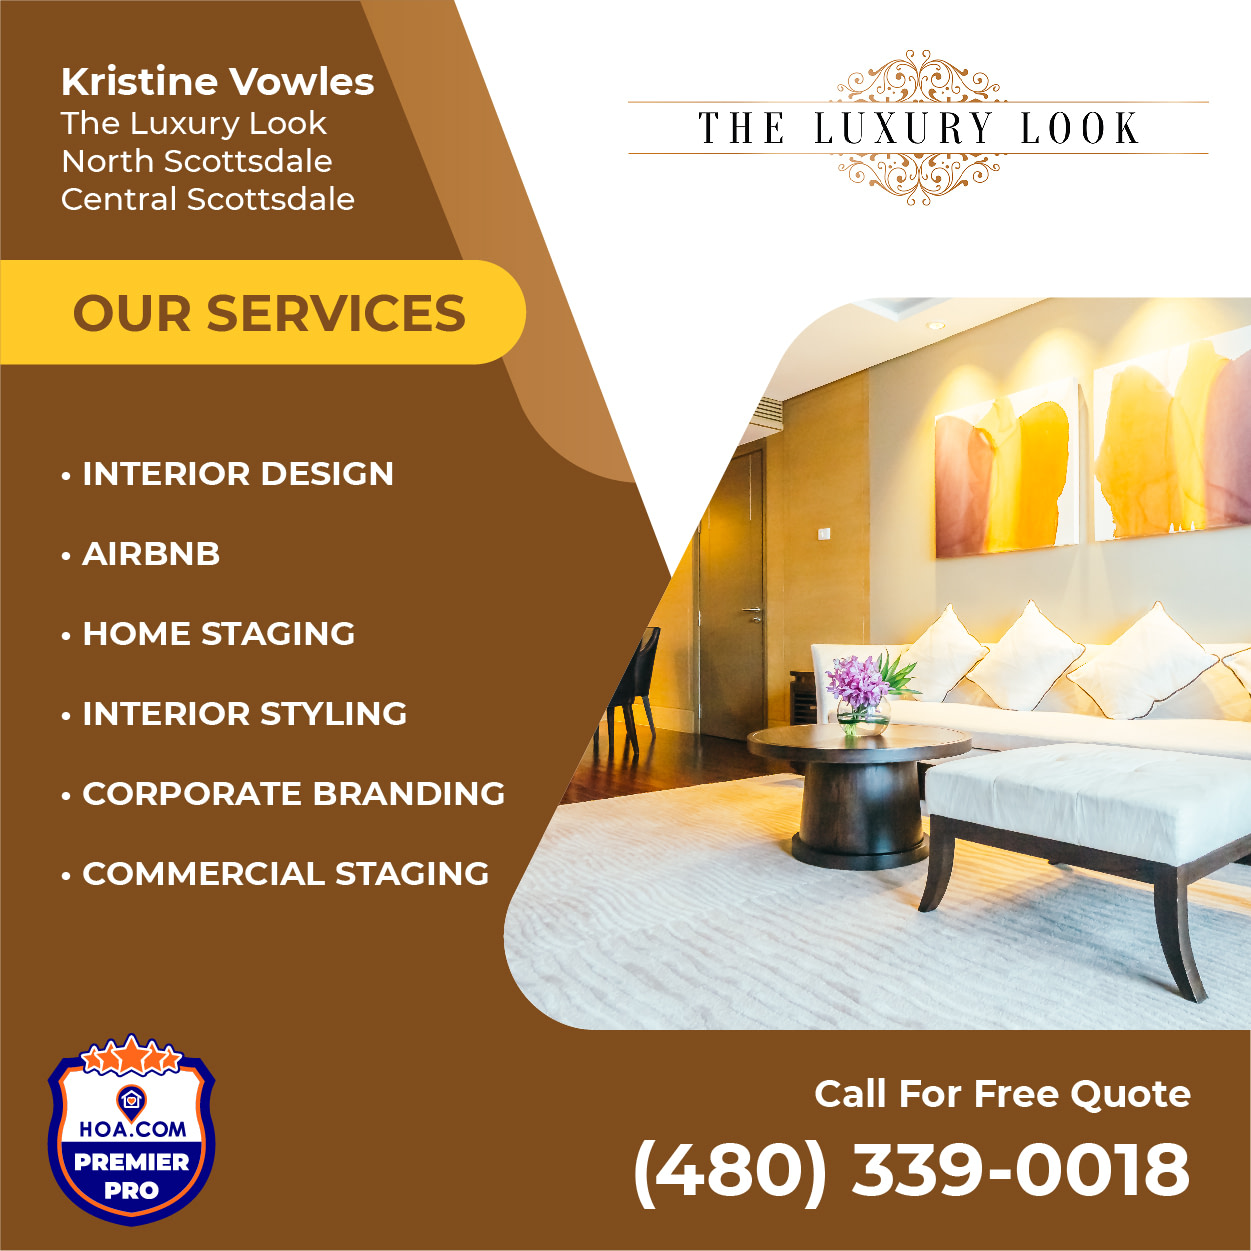 The Luxury Look Services